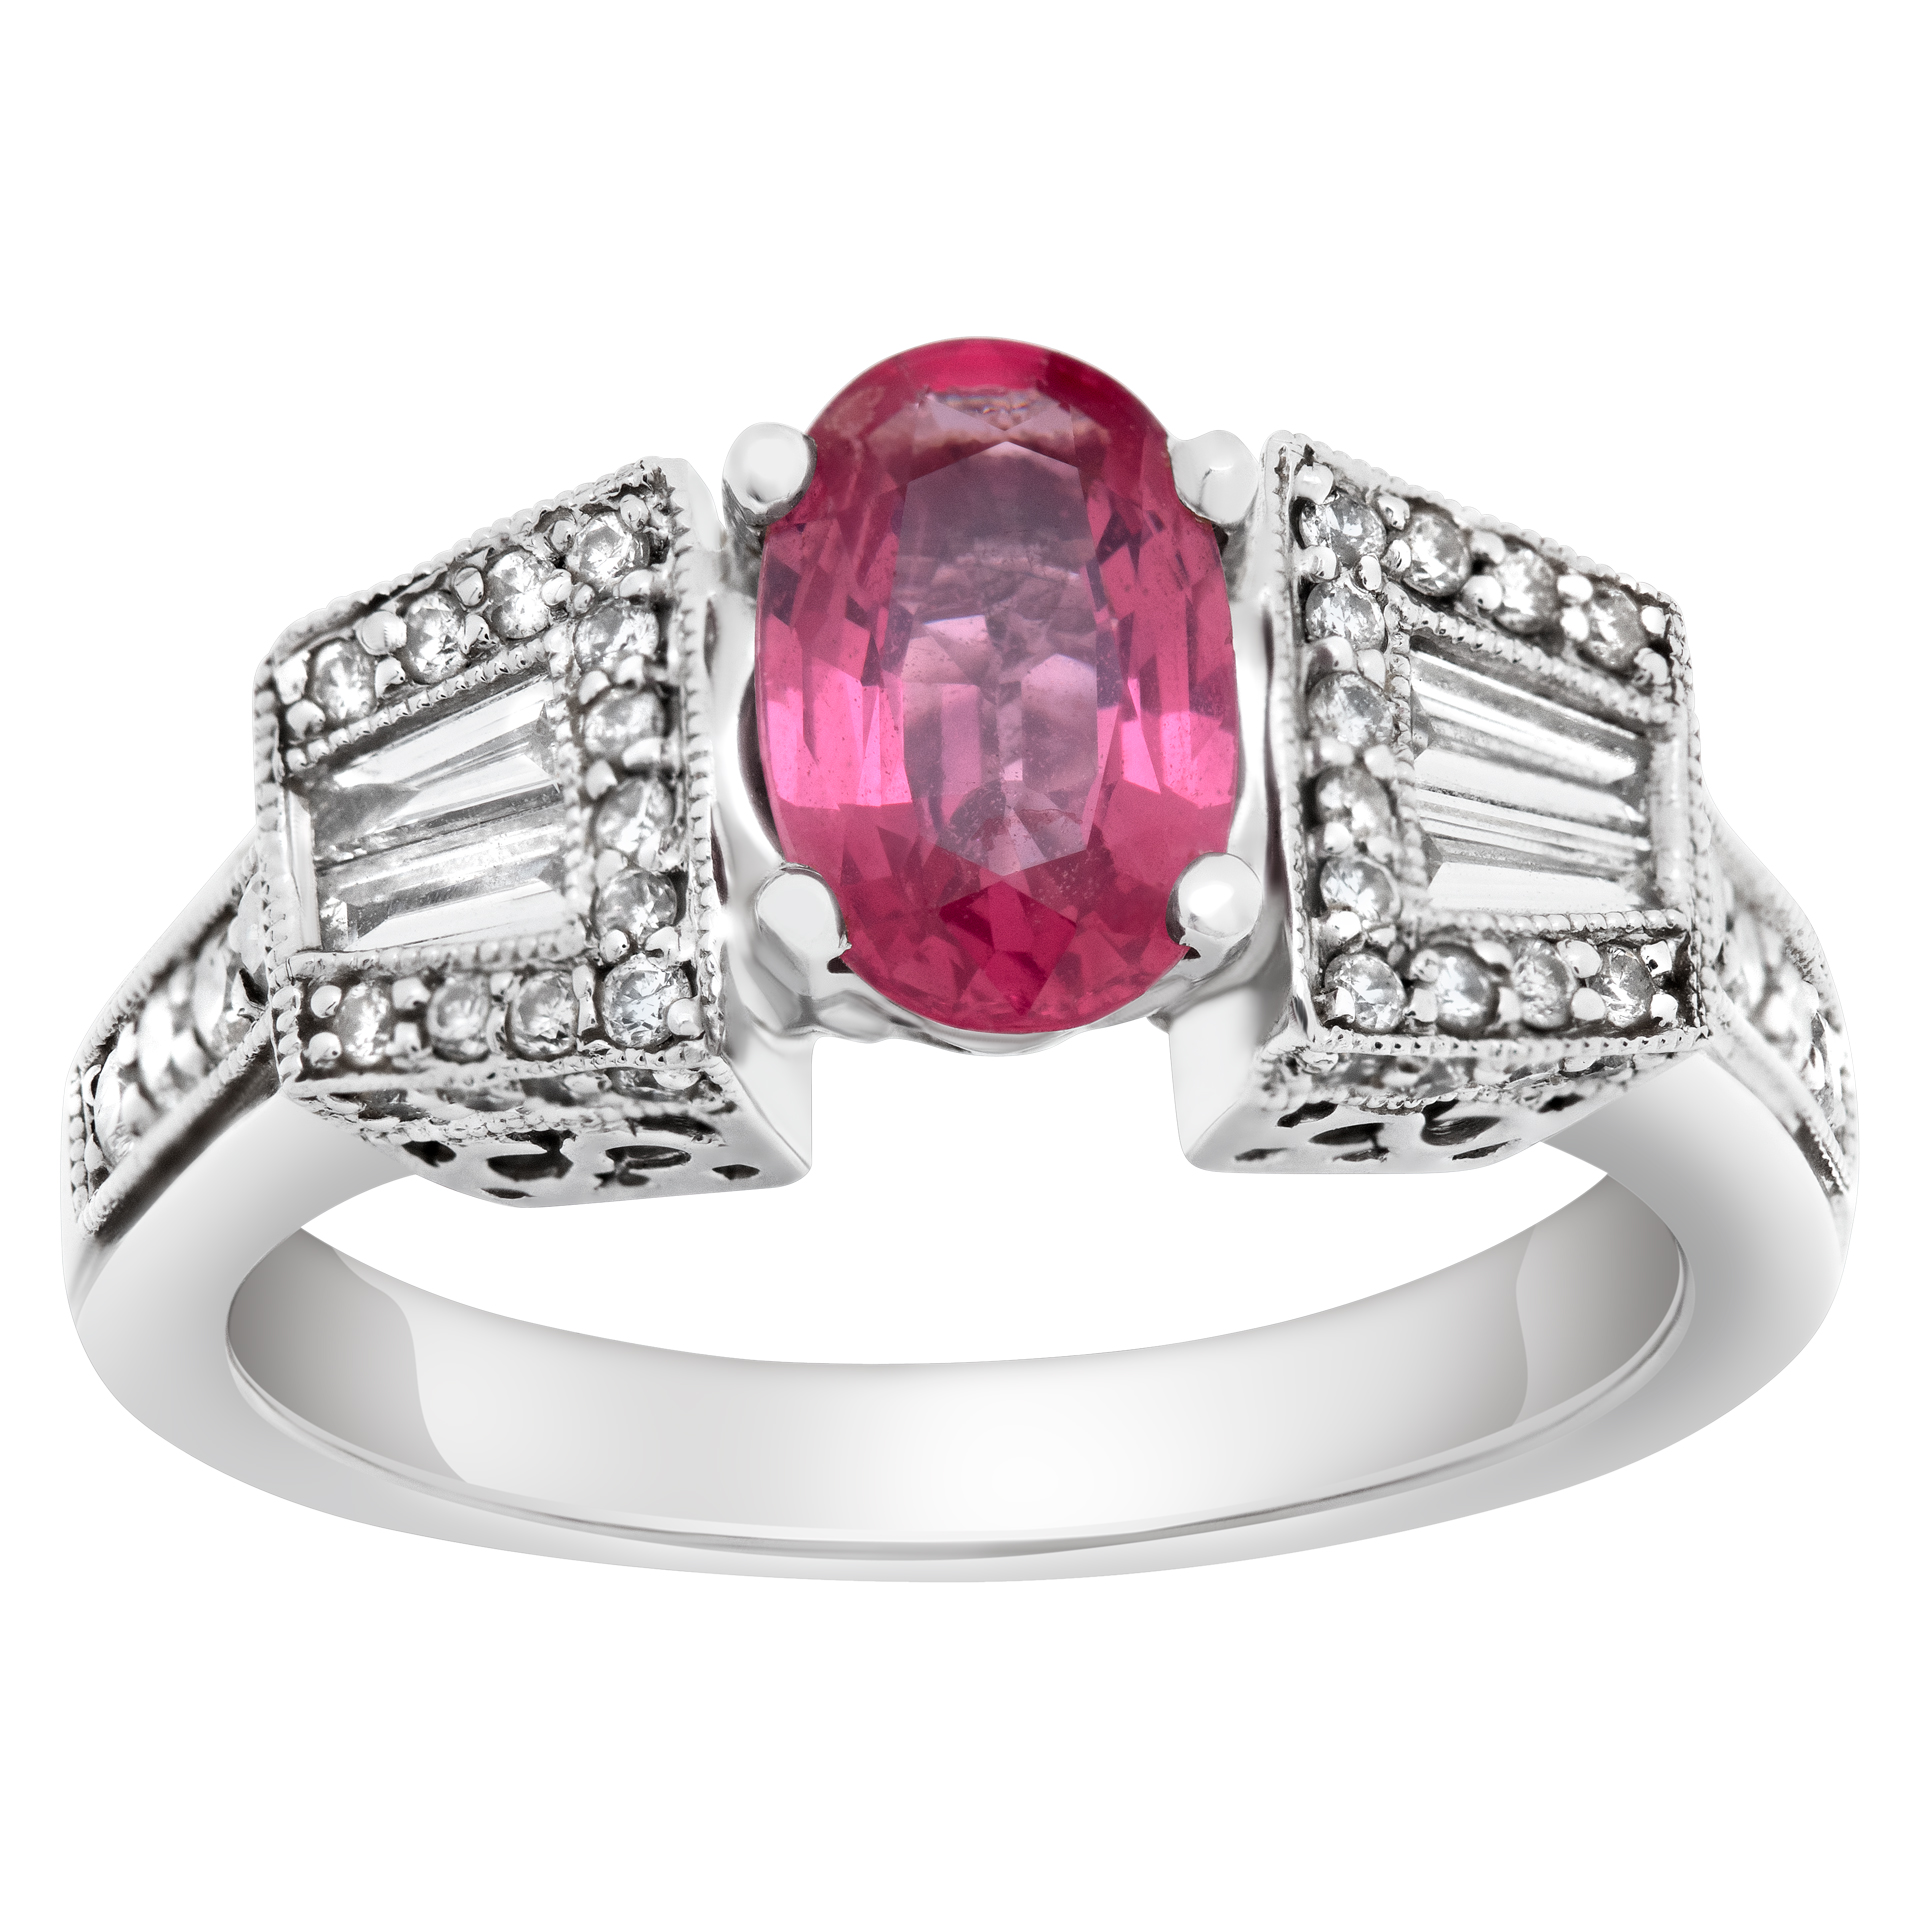 Oval brilliant cut pink spinel (approx. 2 carats) & diamonds ring set in 14K white gold image 1